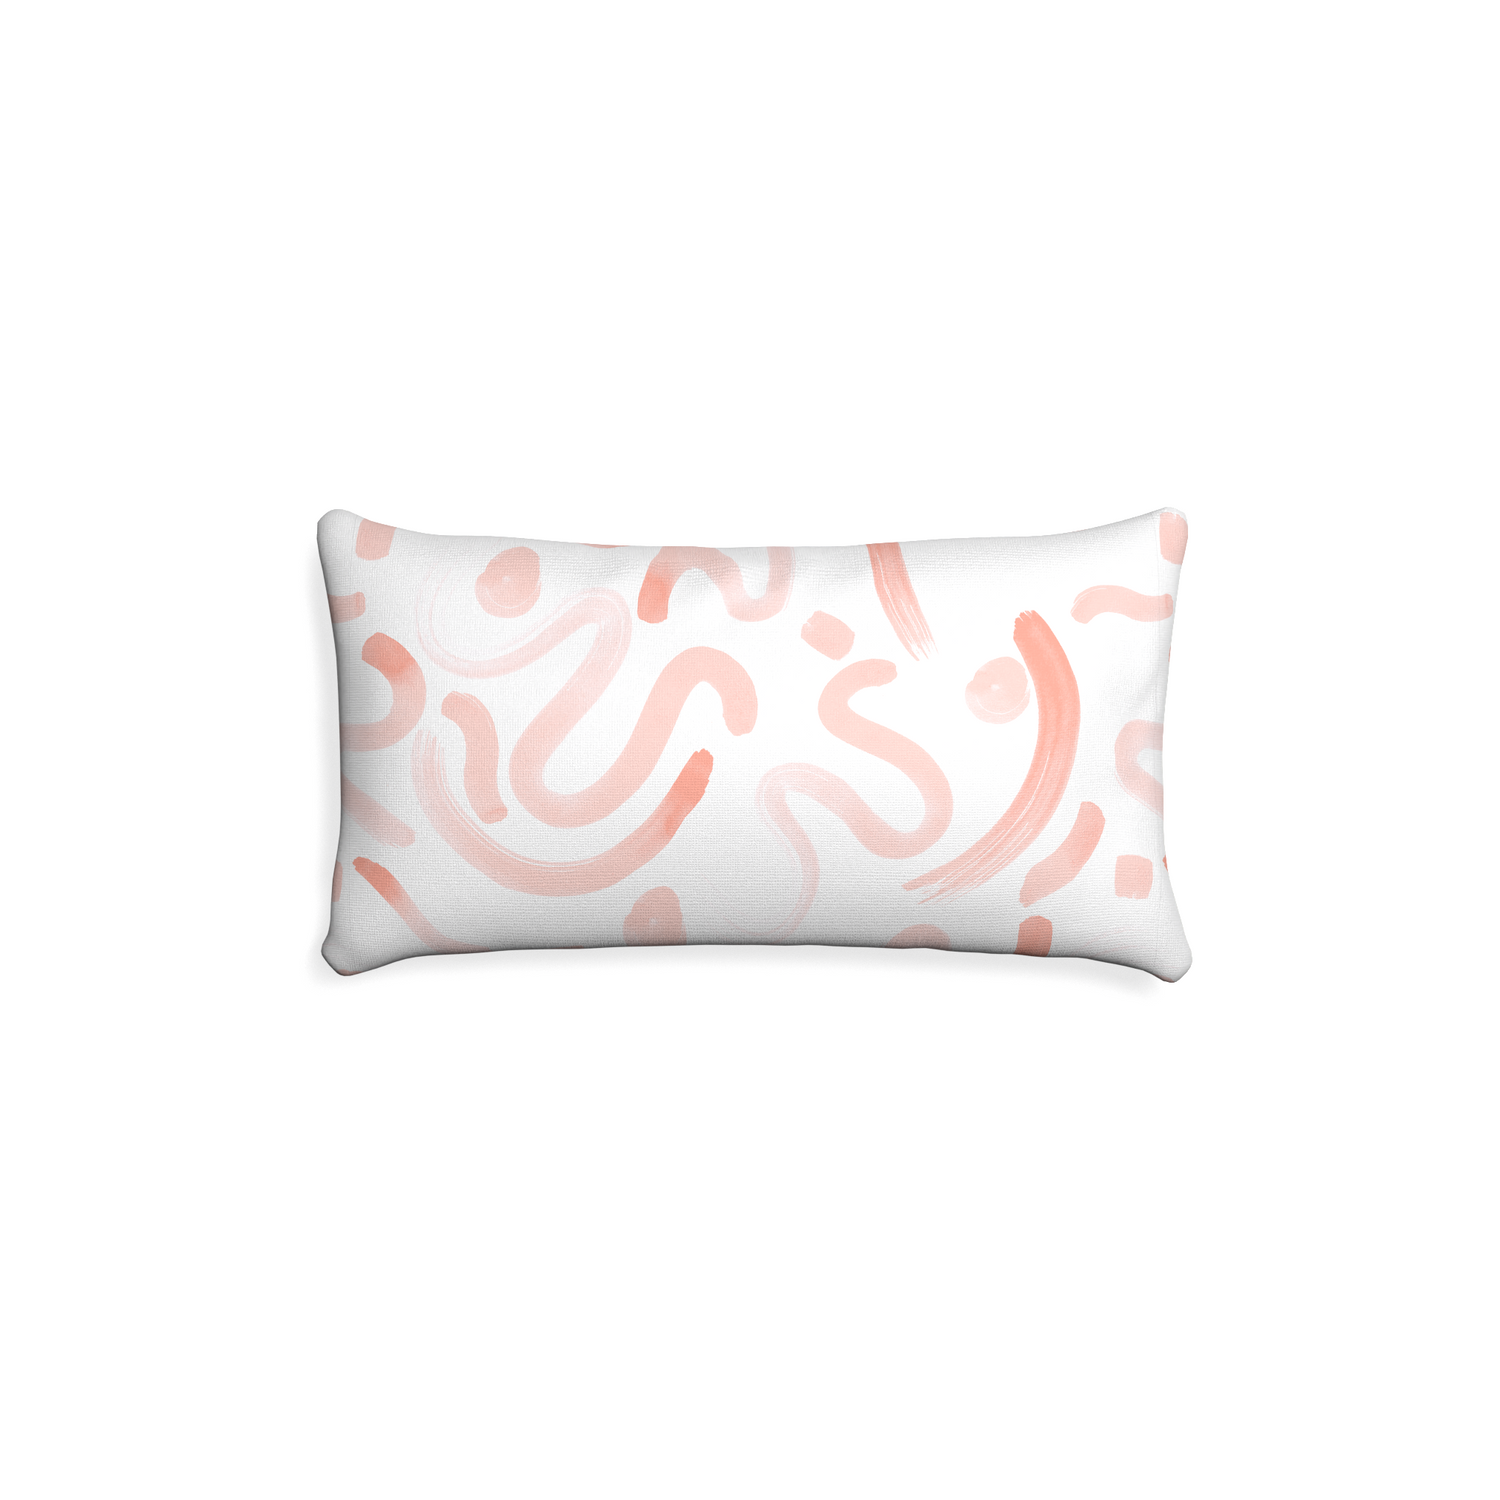 Petite-lumbar hockney pink custom pink graphicpillow with none on white background